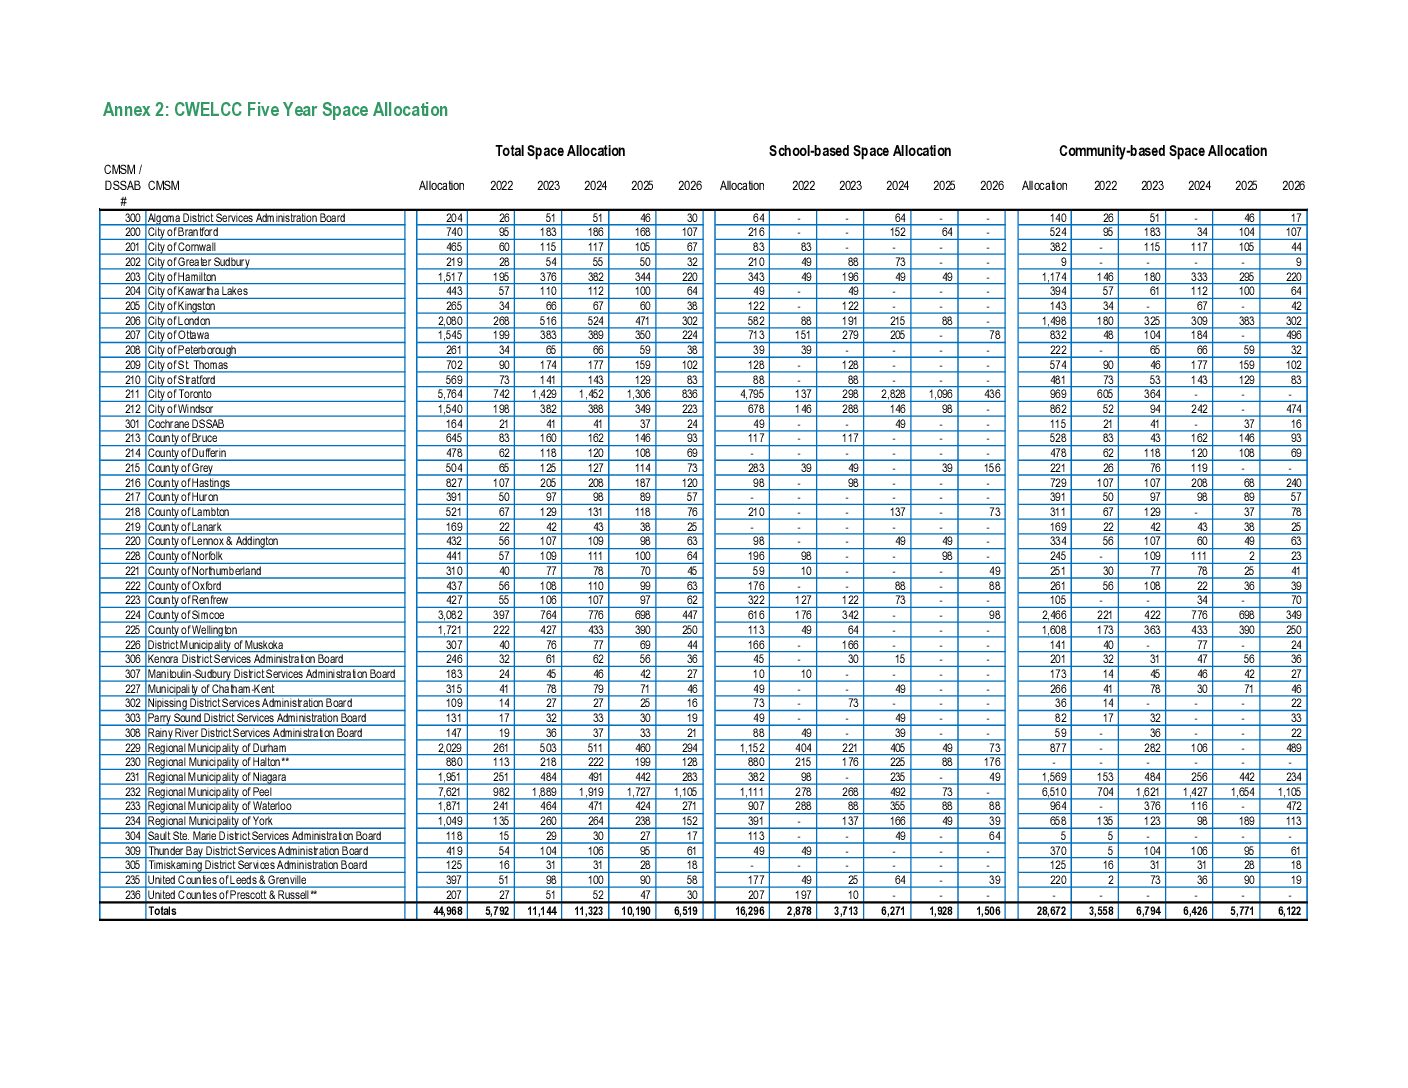 An image of the PDF document containing the detailed table of 5 year space allocations.